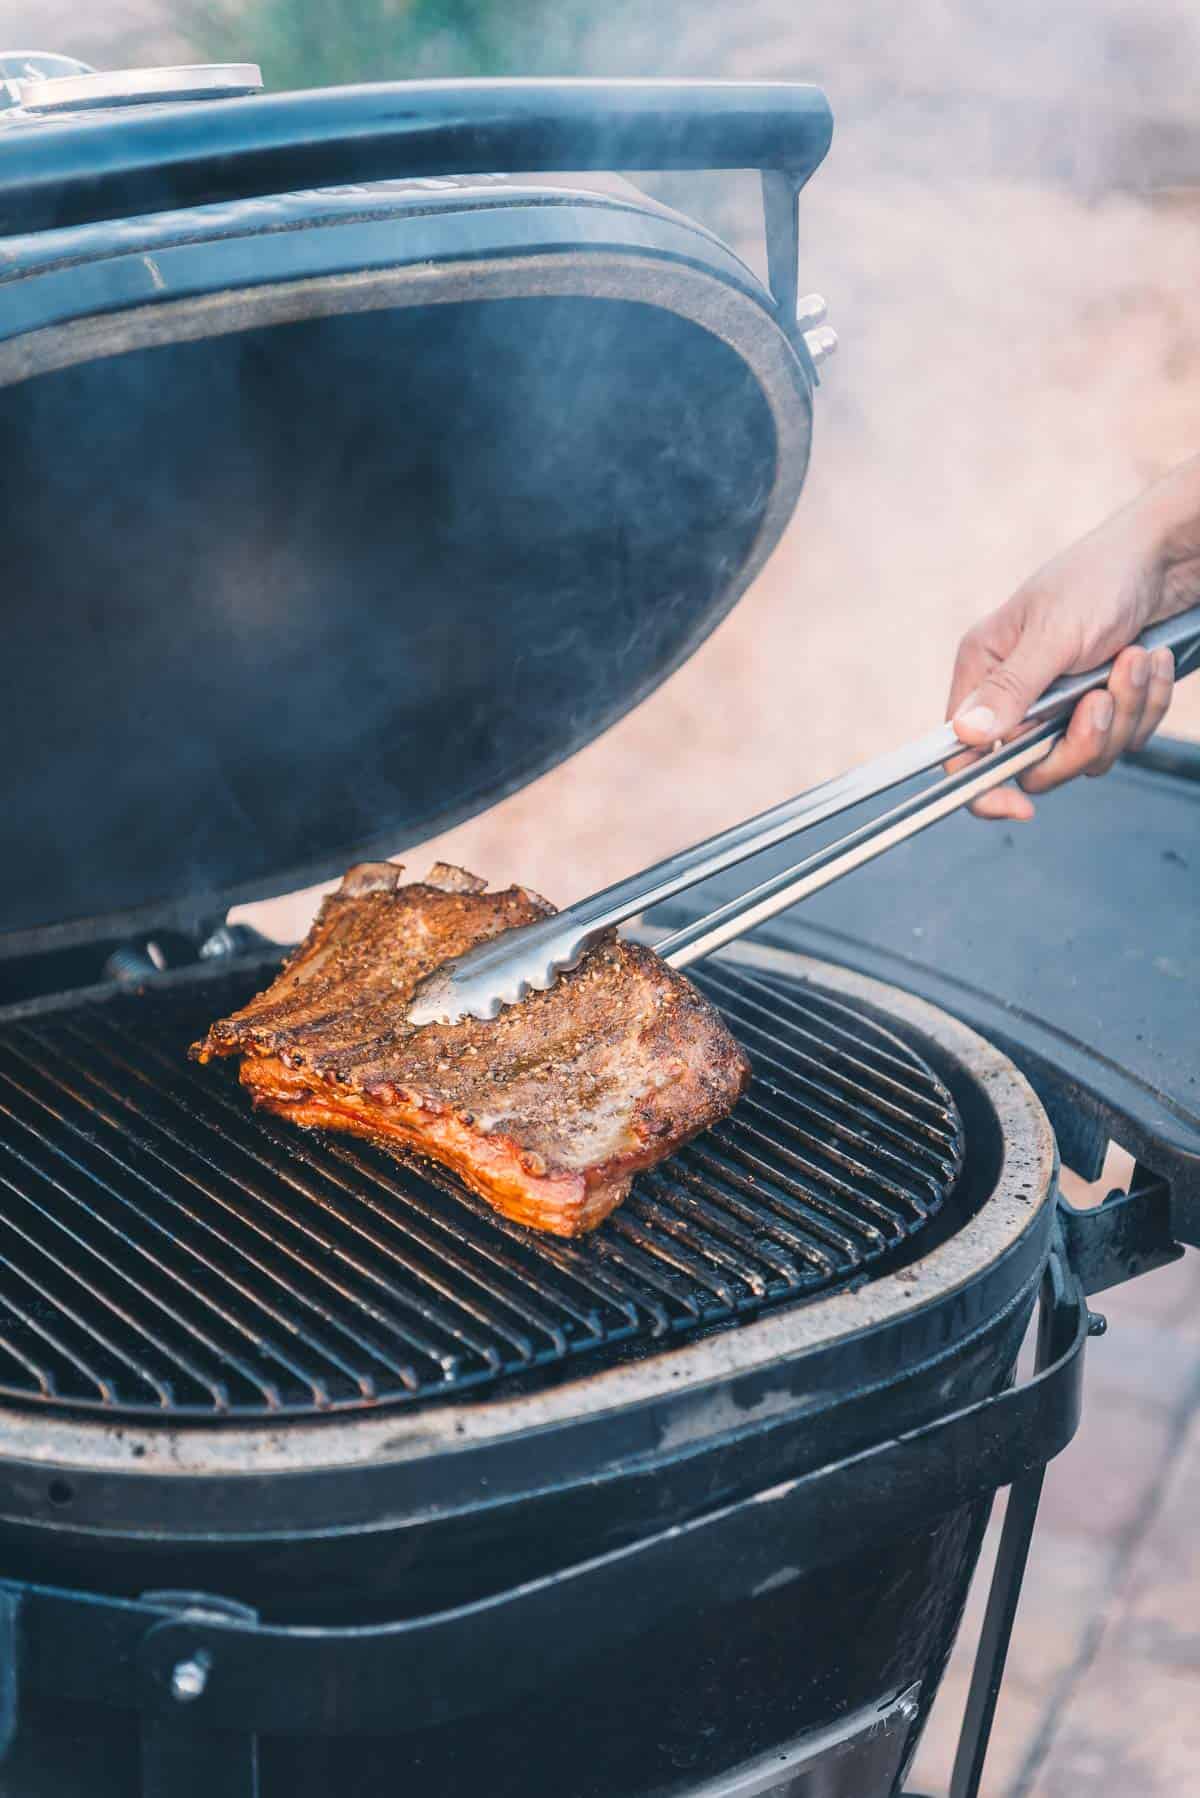 Ribs being placed fat side down on the grill with long tongs.